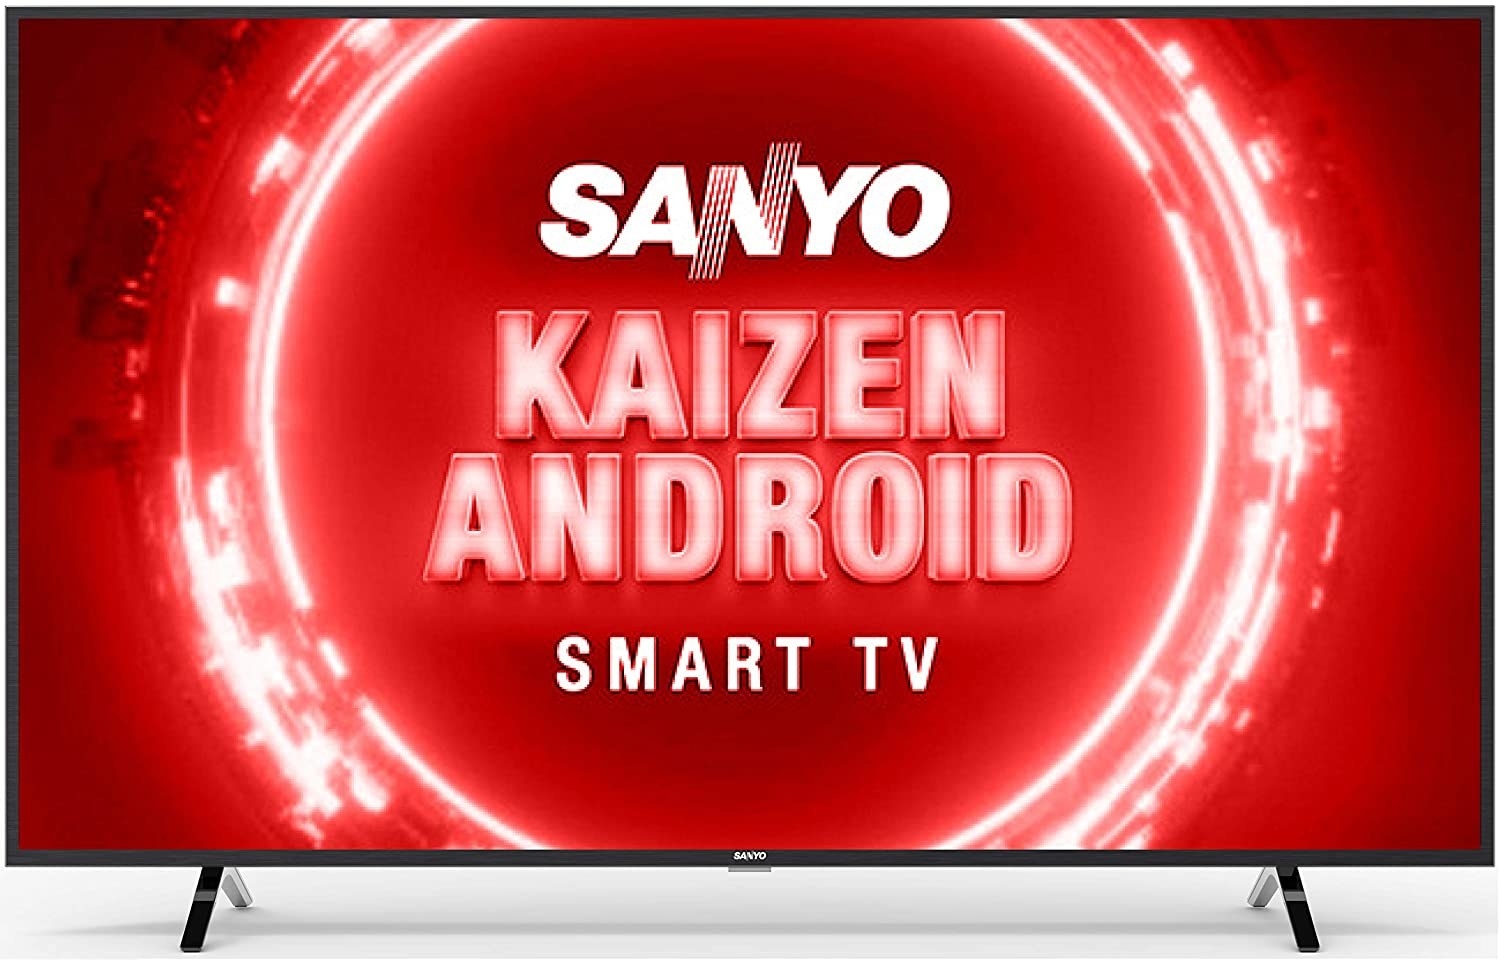 Sanyo TV with a red loading screen